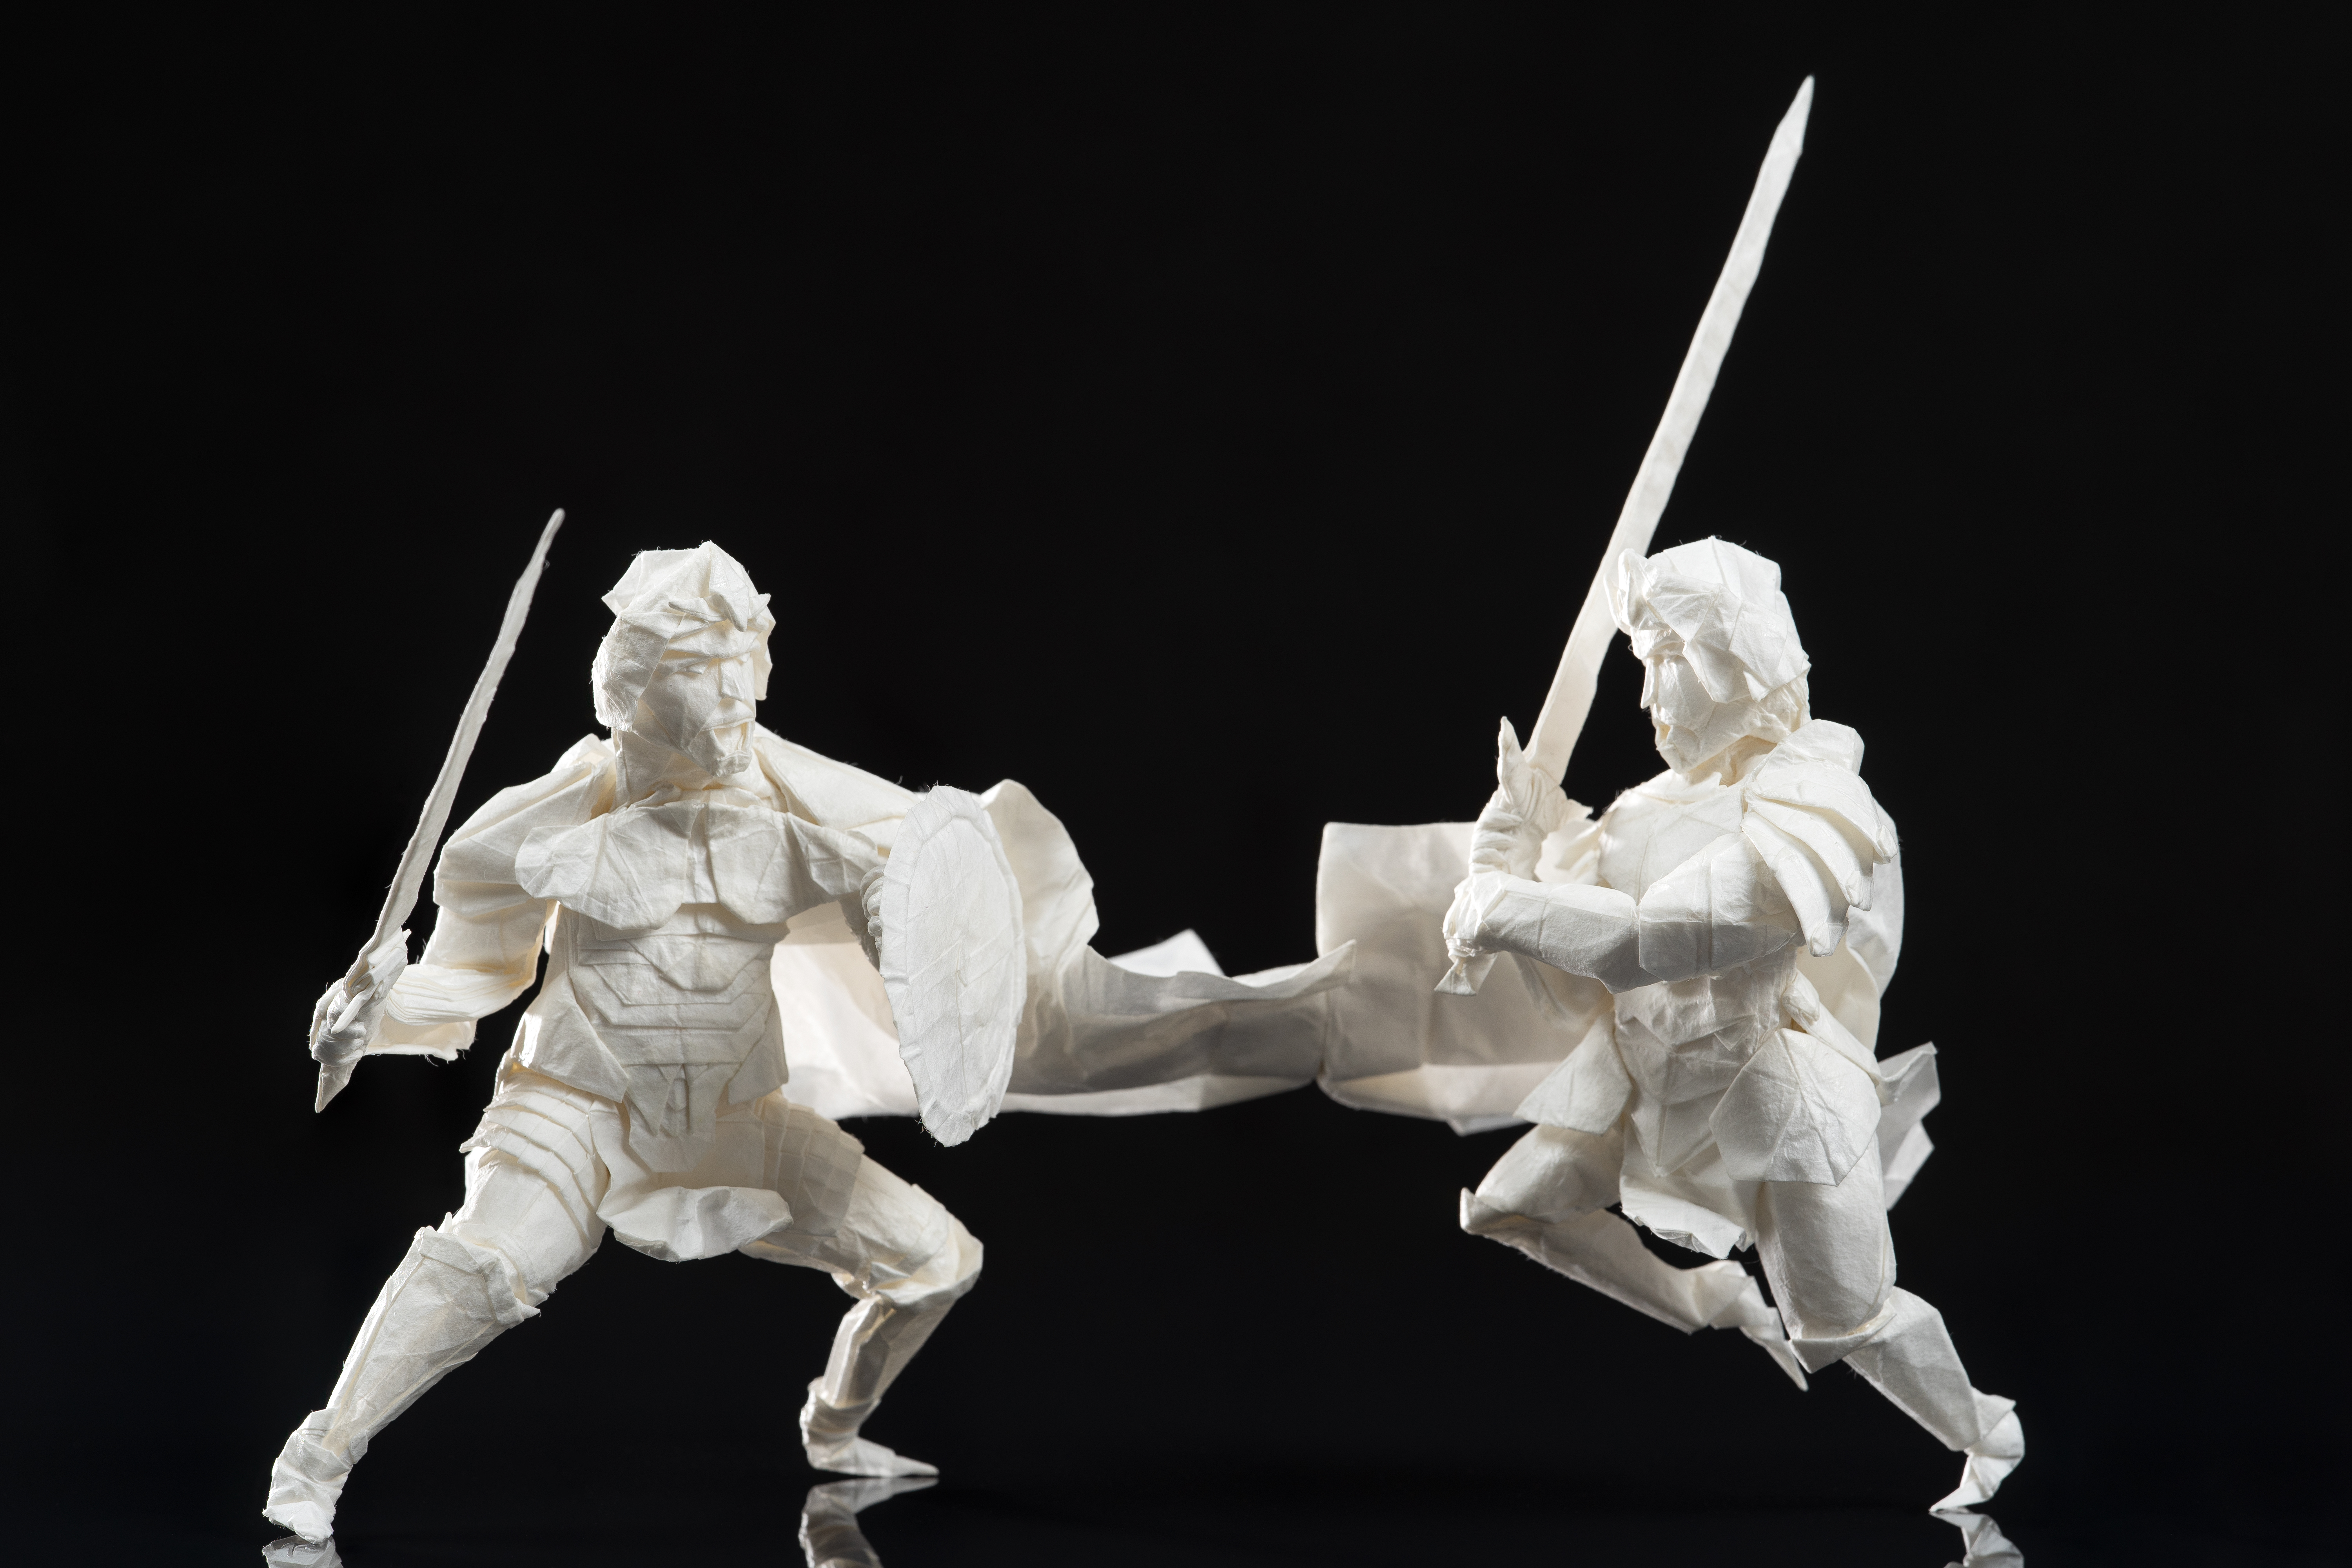 Juho Konkkola, An origami artist from Finland, has completed a two and a half year project which used just one sheet of paper and took 109 hours of folding